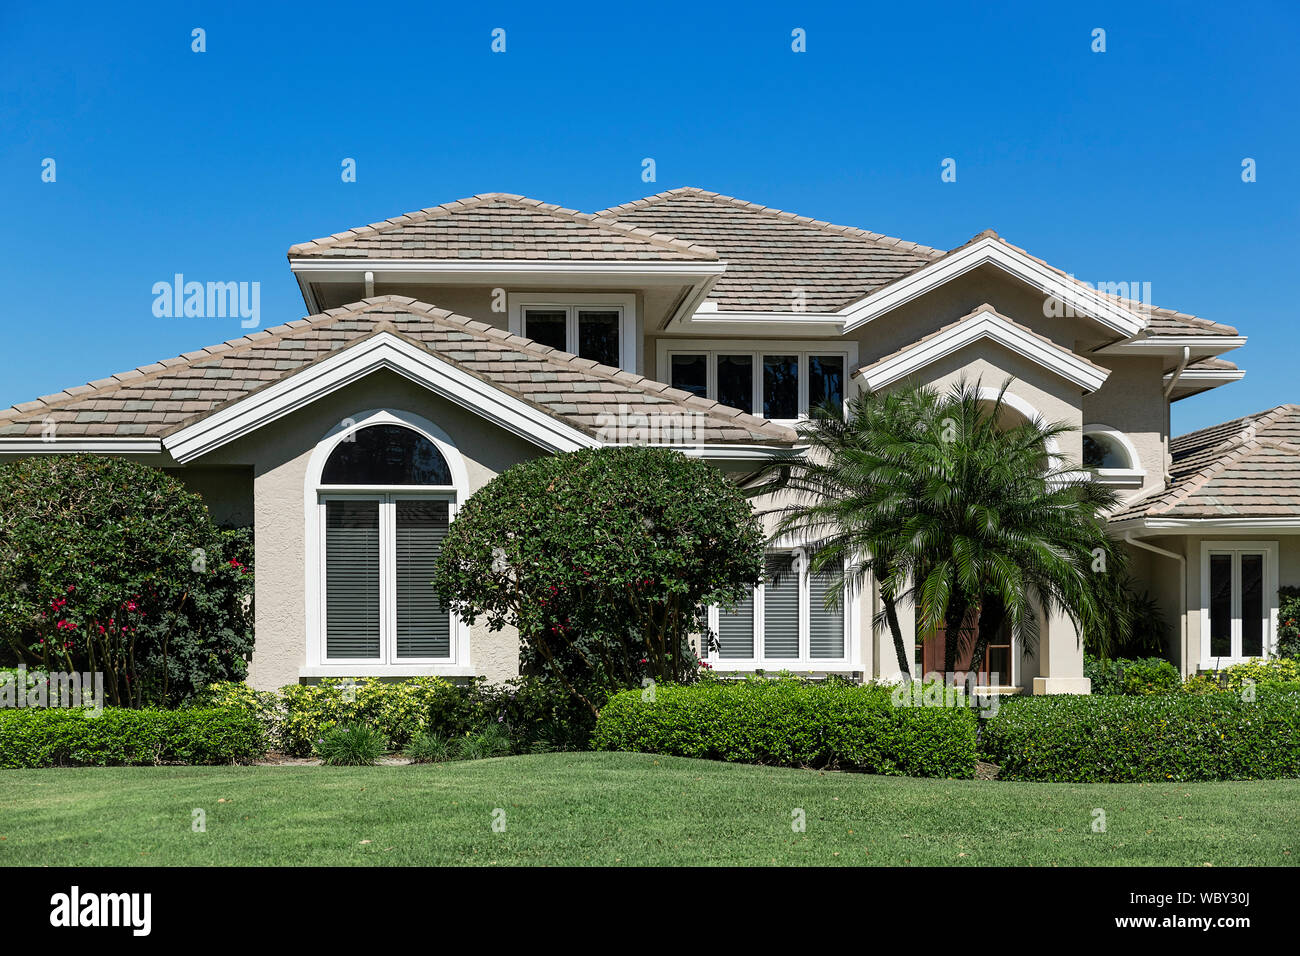 Typical home in one of the many  gated communities within the Naples area, Florida, USA. Stock Photo